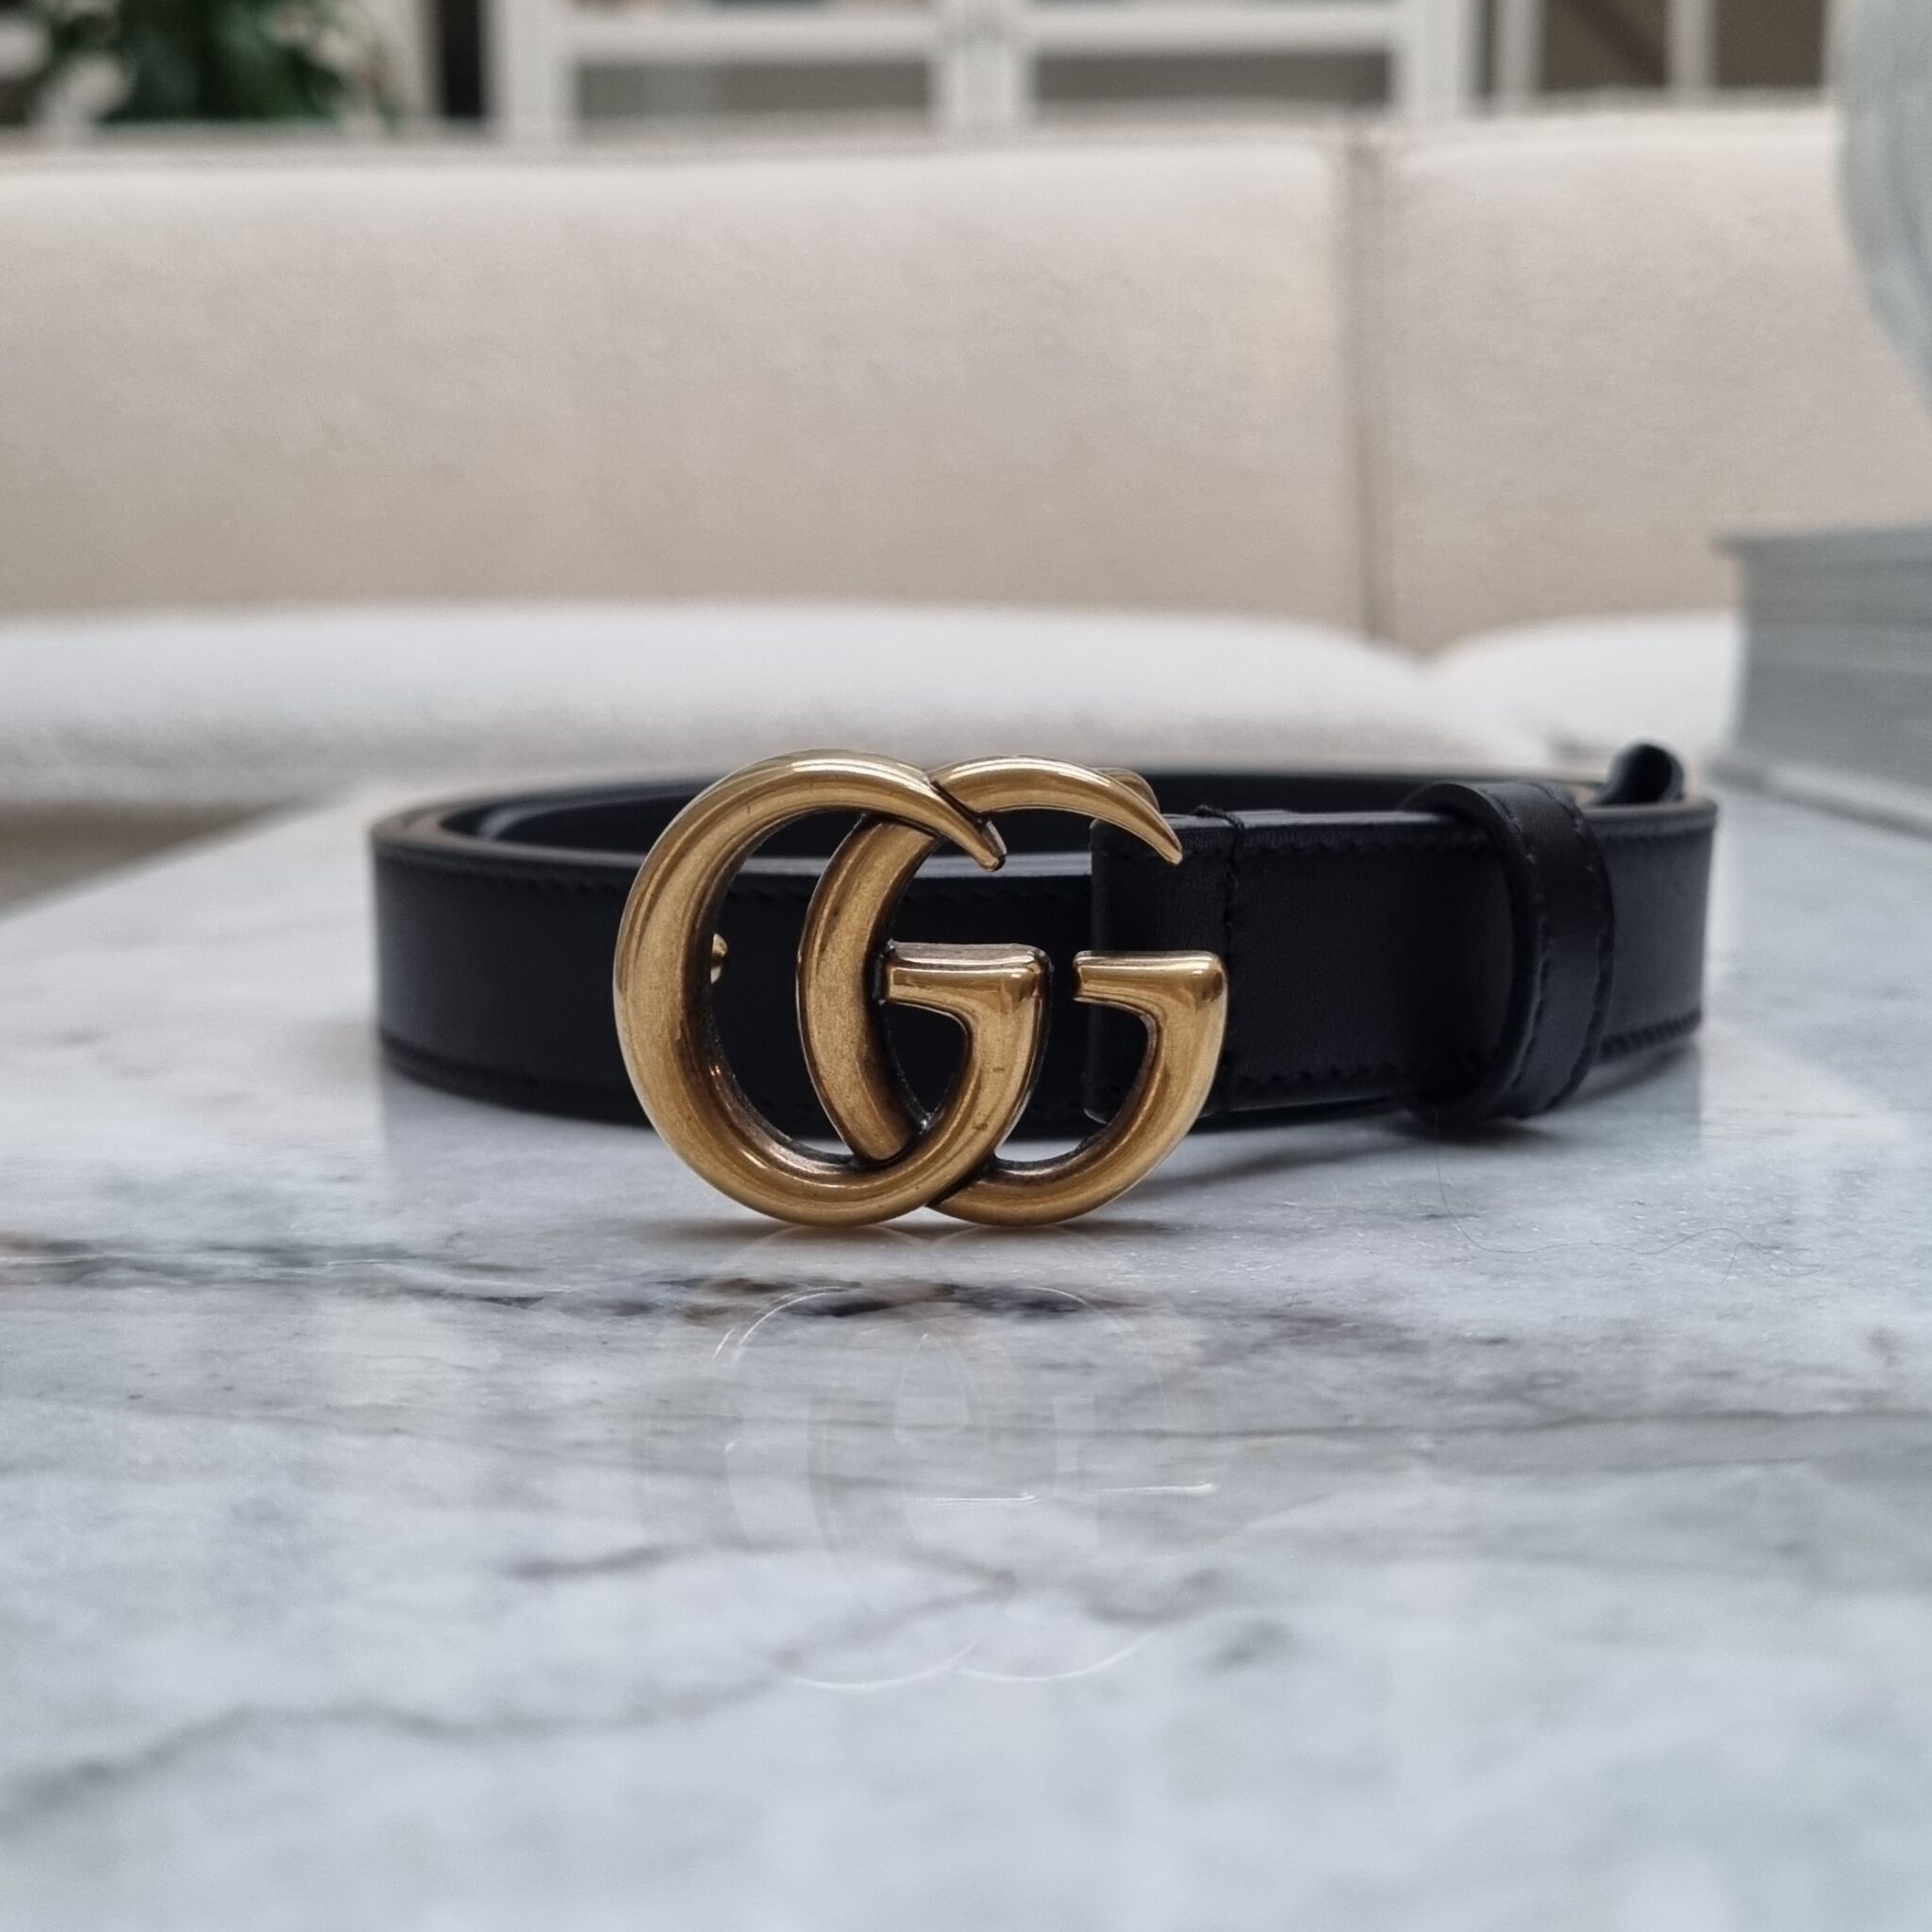 blæk regering svælg Gucci Belt With Double G Buckle, Sort, 85 - Laulay Luxury